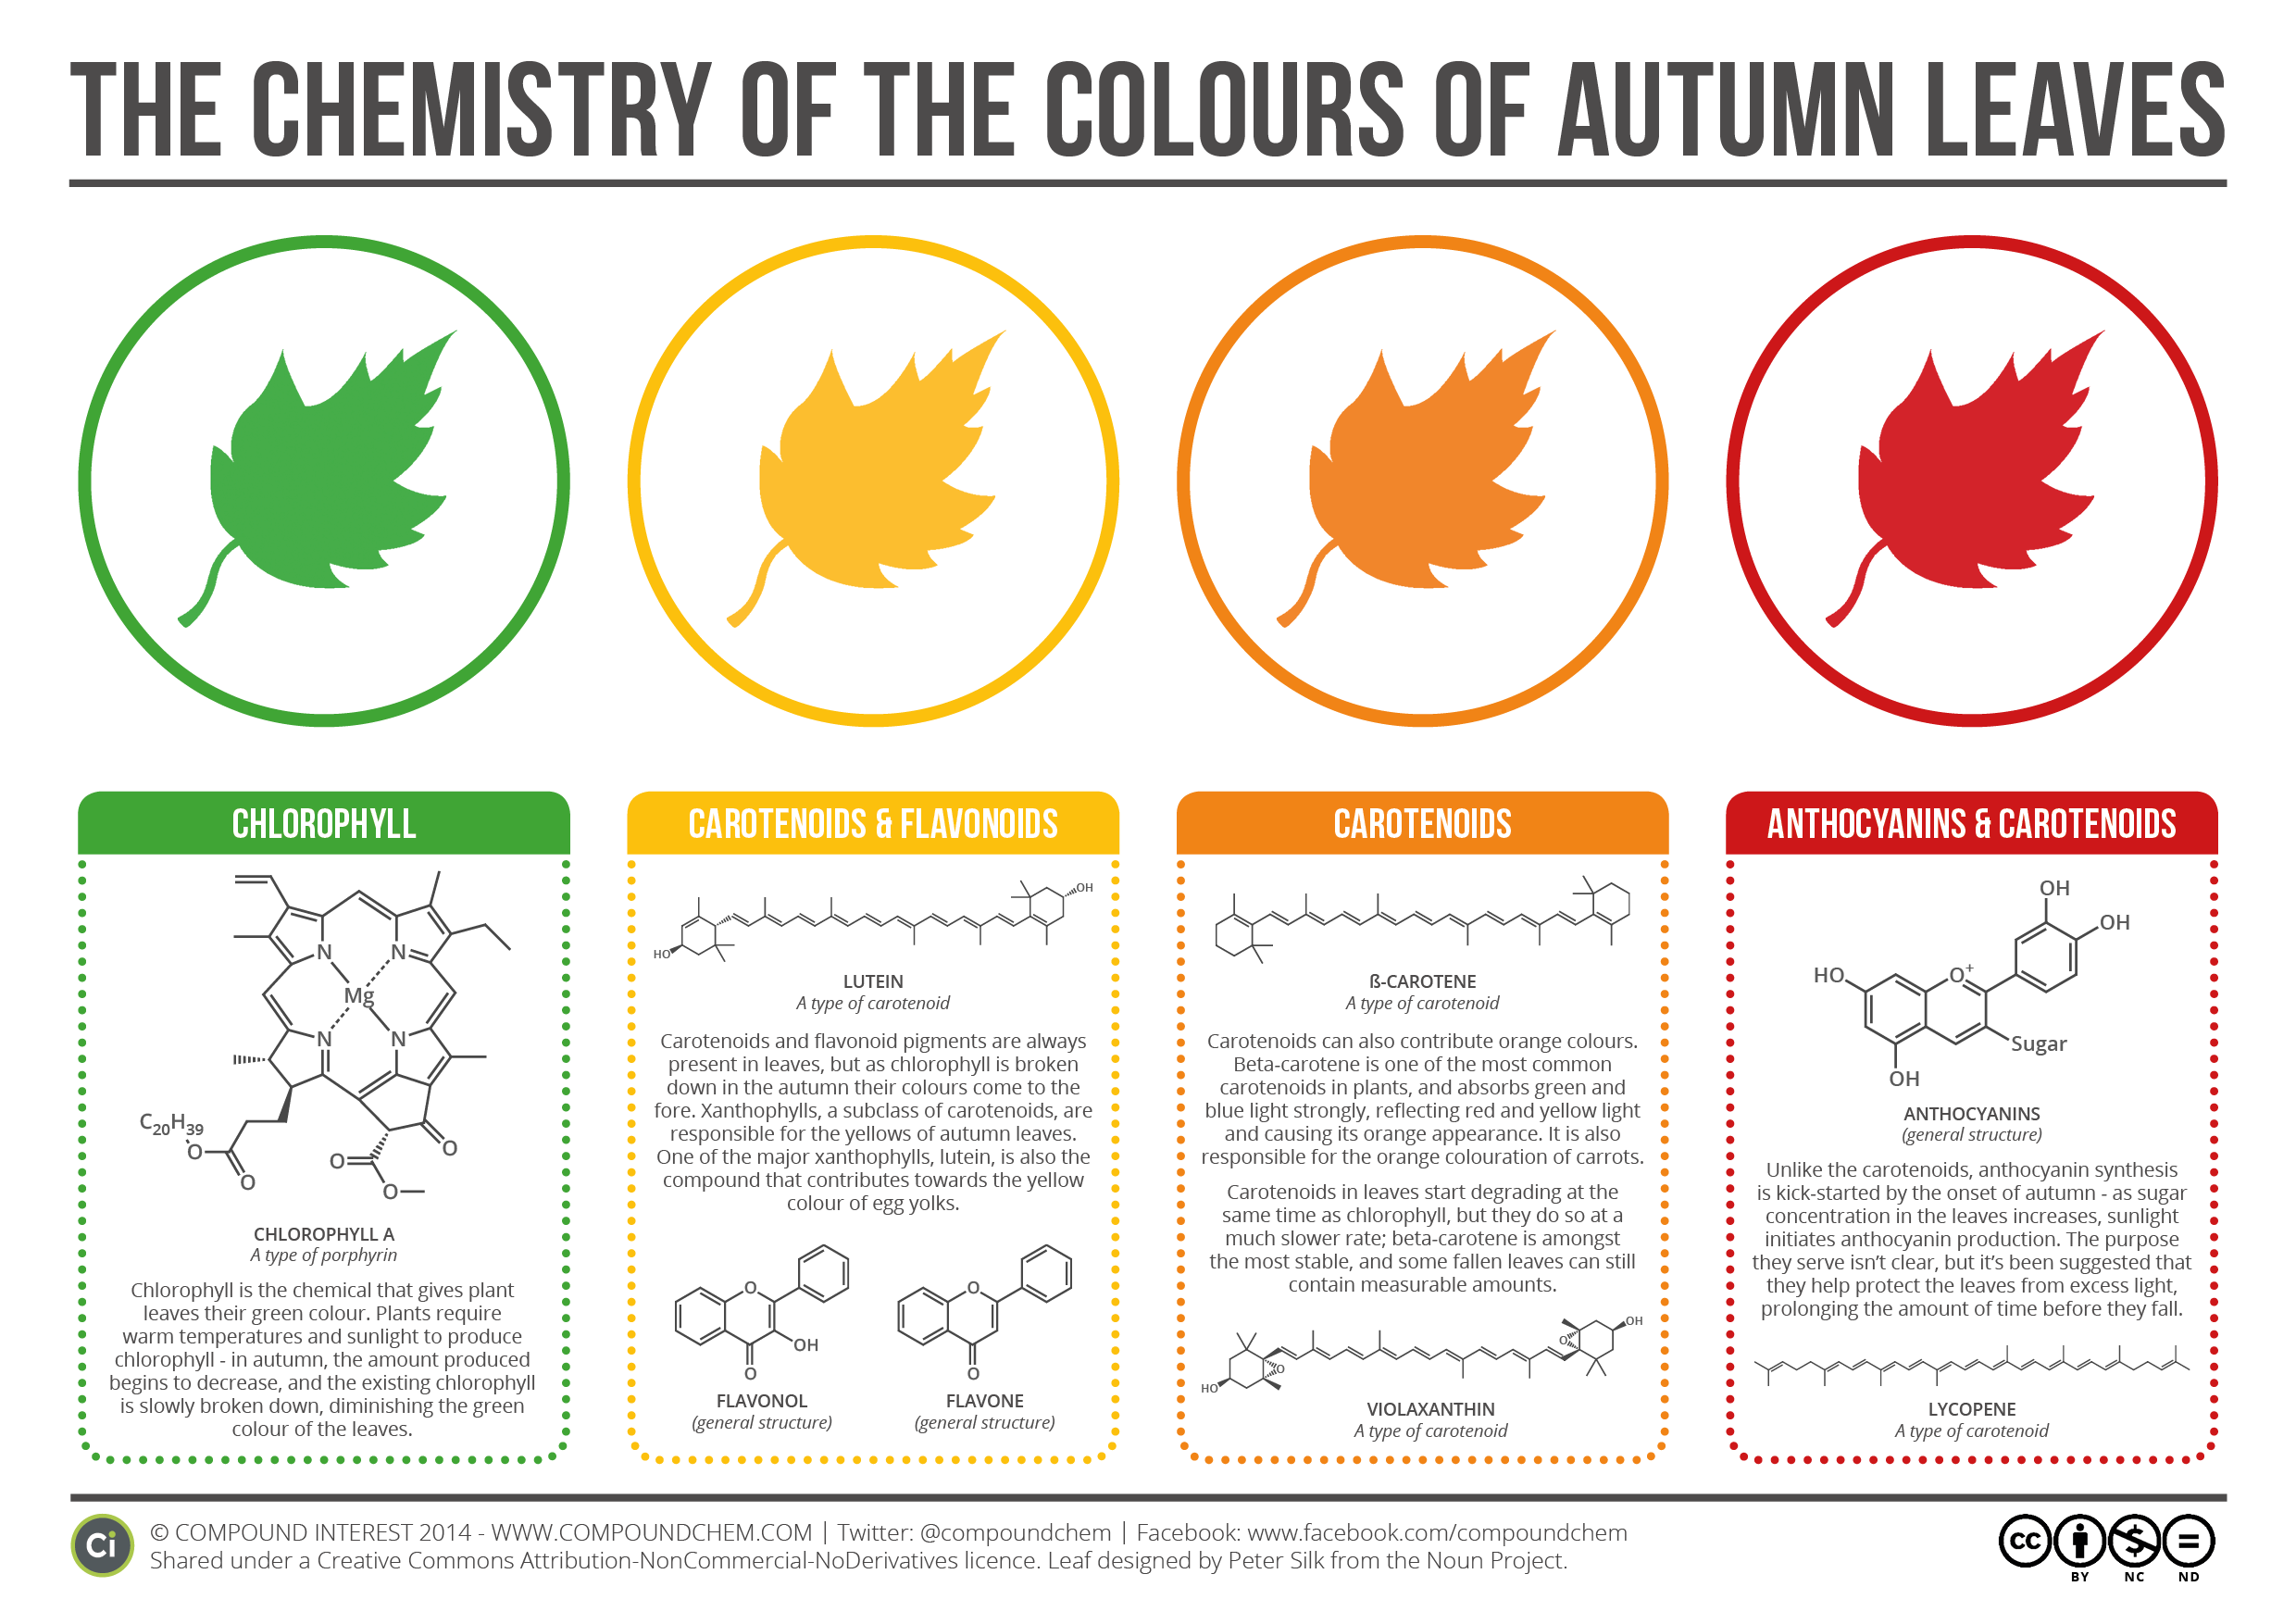 Fichier:Chemistry-of-the-Colours-of-Autumn-Leaves-v2.png